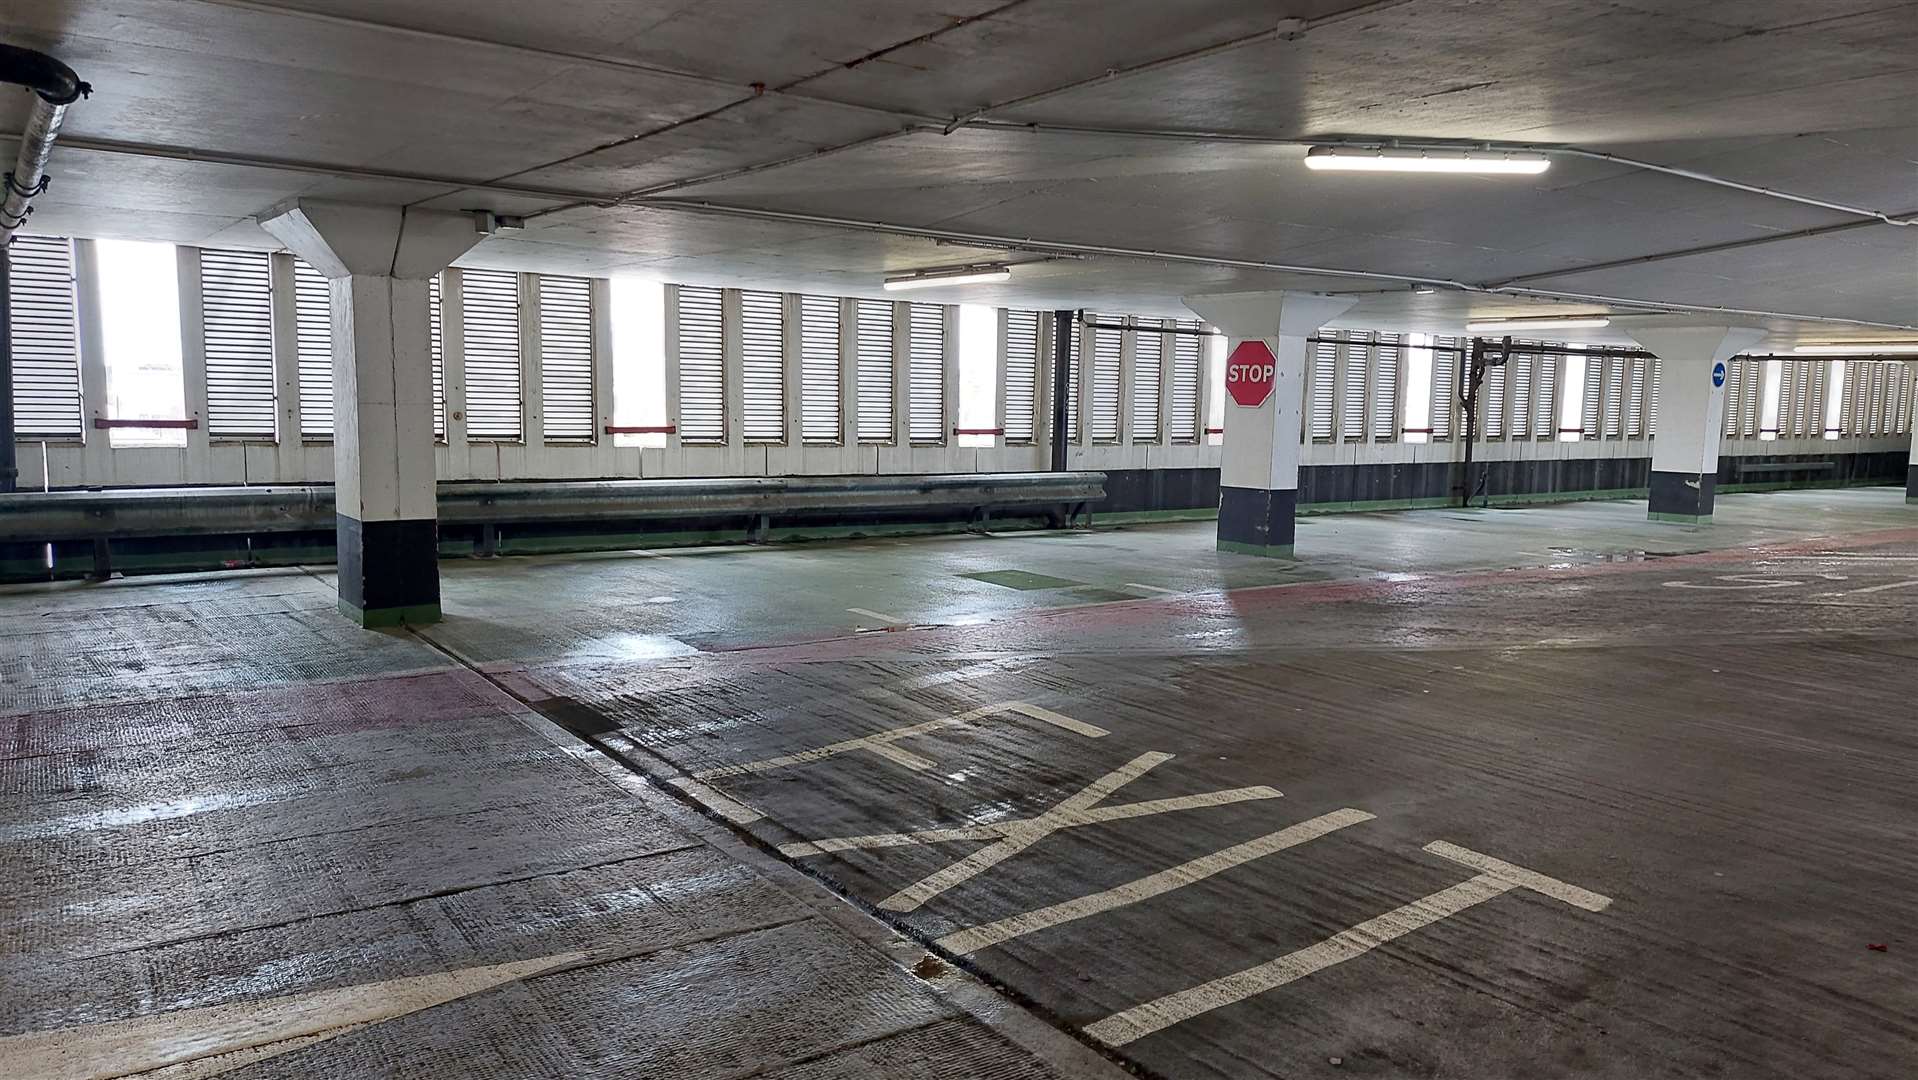 Police were called to the car park two days in a row earlier this week